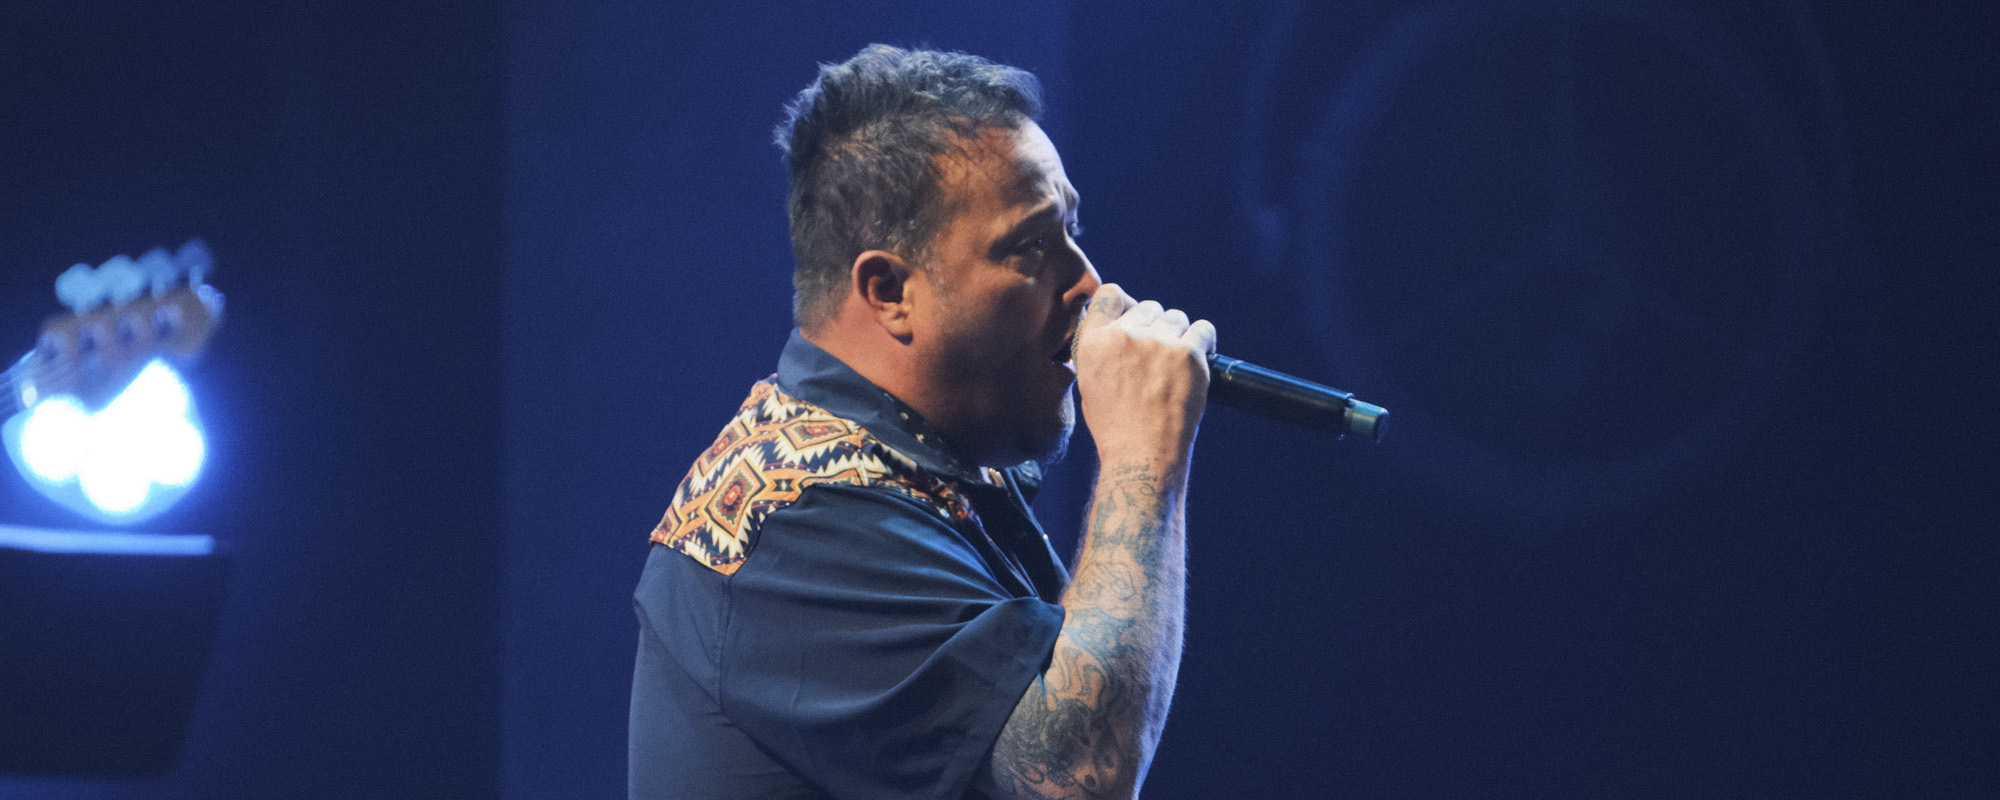 The Influences and Meaning Behind “Follow Me” by Uncle Kracker